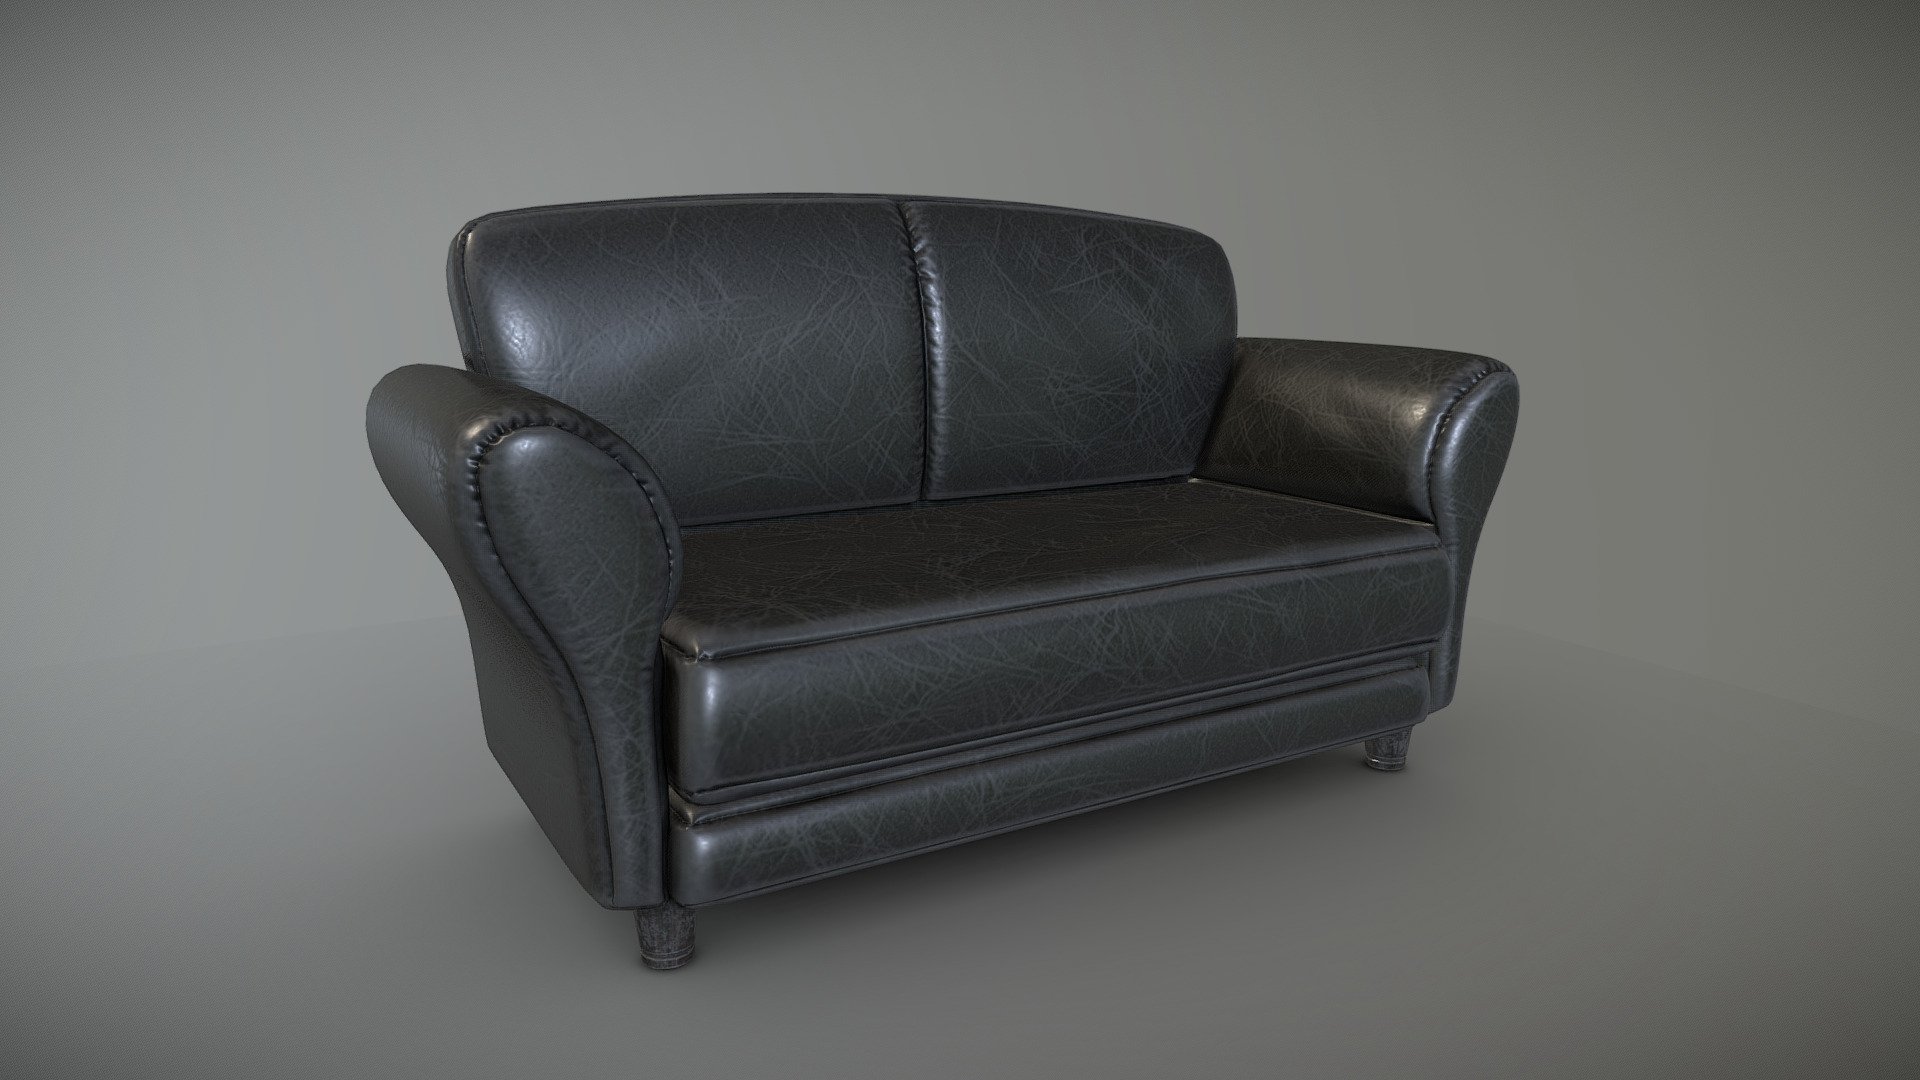 Classic sofa 2022

I made it in Blender and textured in Substance Painter

used 1024x1024 textures only - Classic sofa 2022 - 3D model by wlodarski3d 3d model